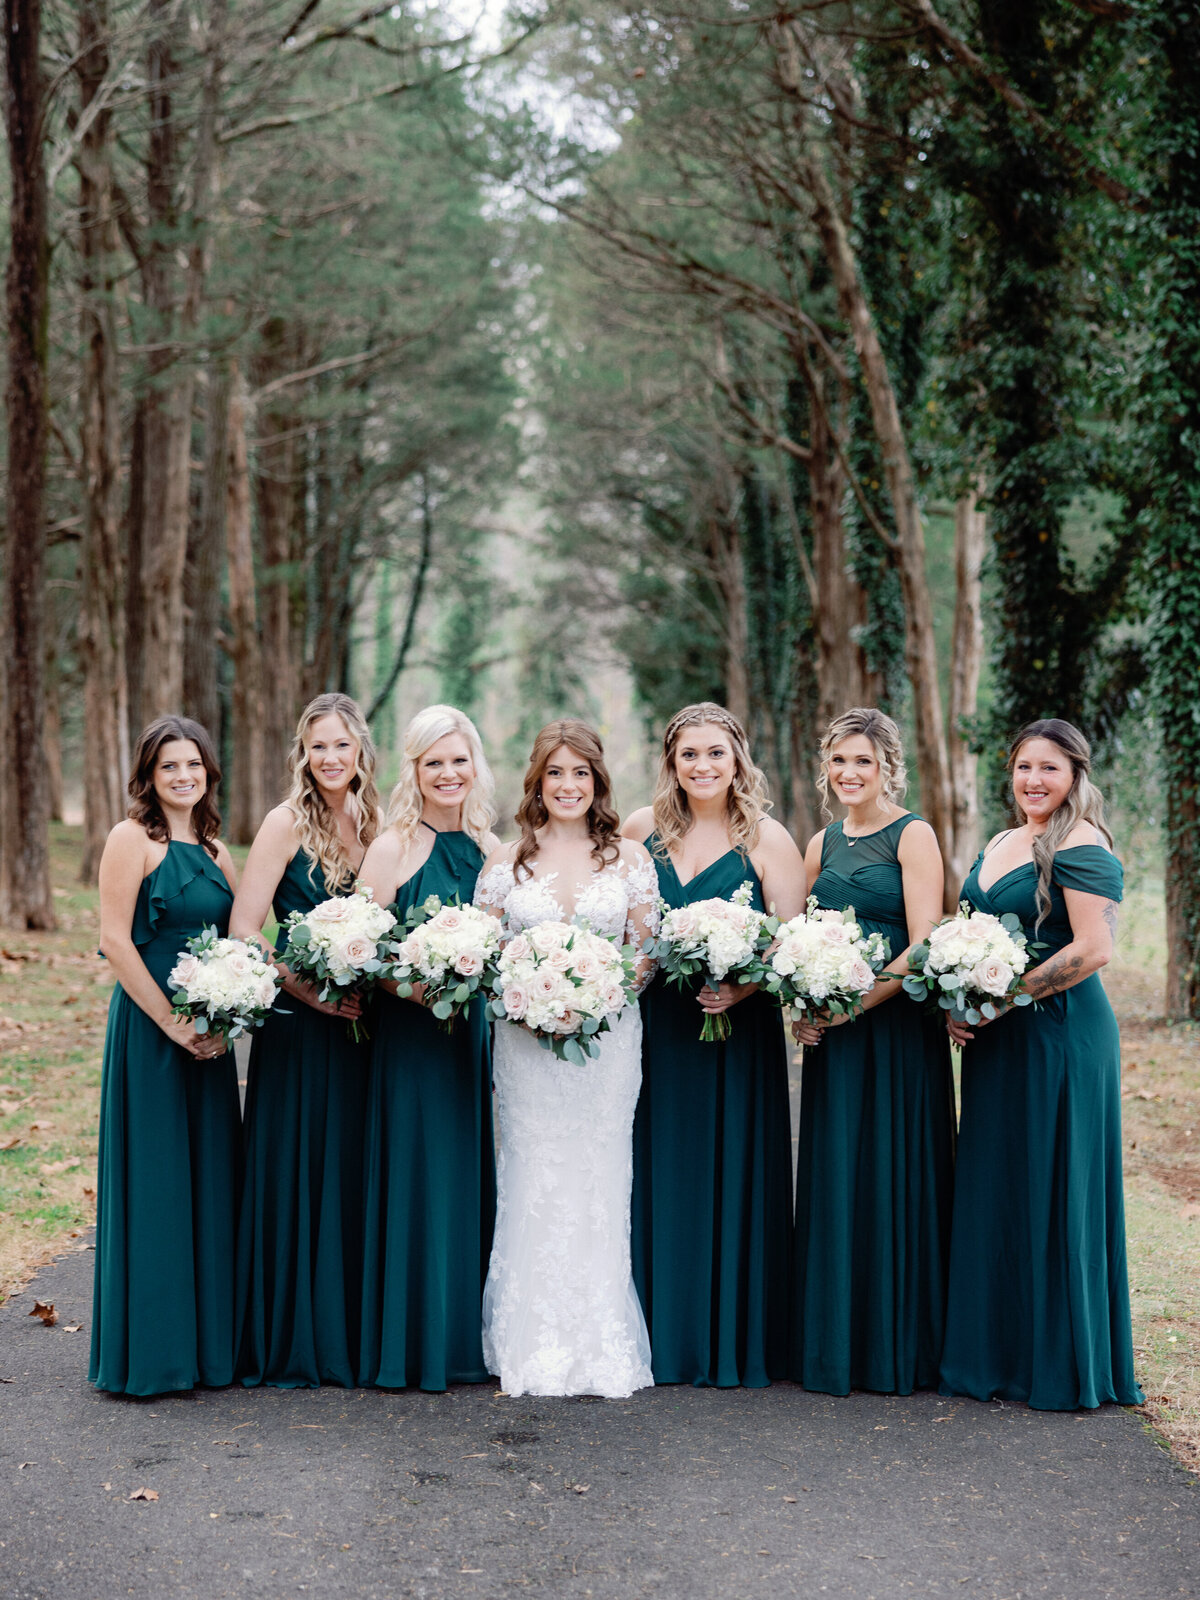 A bride stands with her bridesmaids